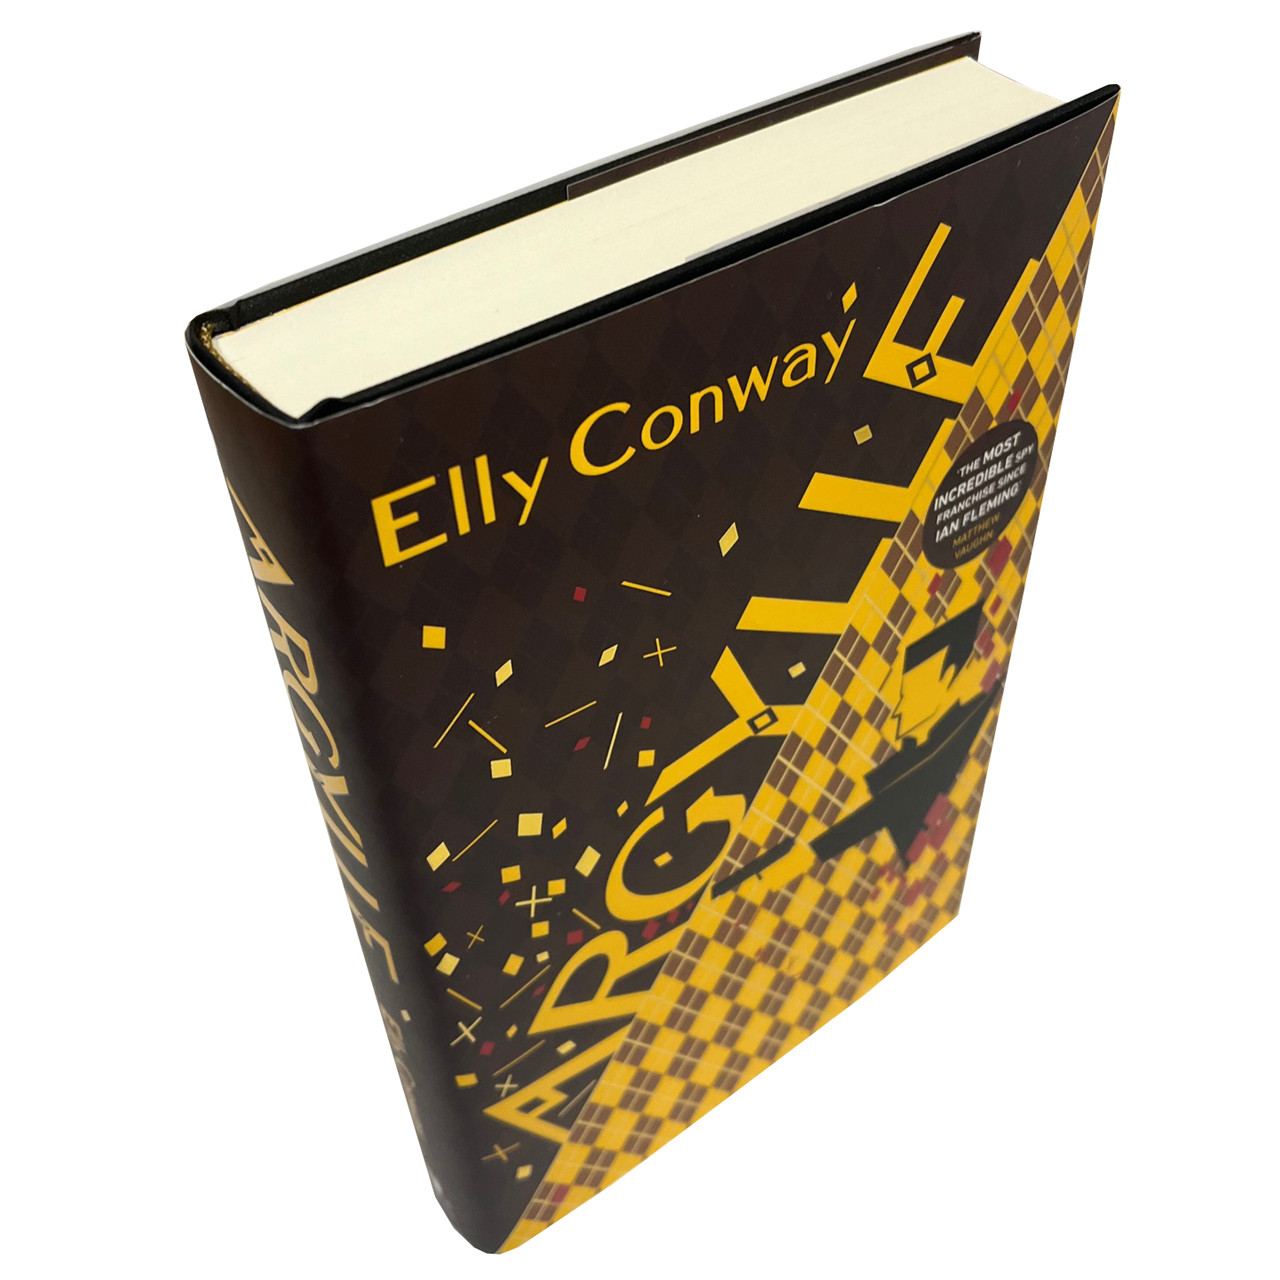 Elly Conway "Argylle" Slipcased UK Signed First Edition w/COA [Very Fine/Sealed]